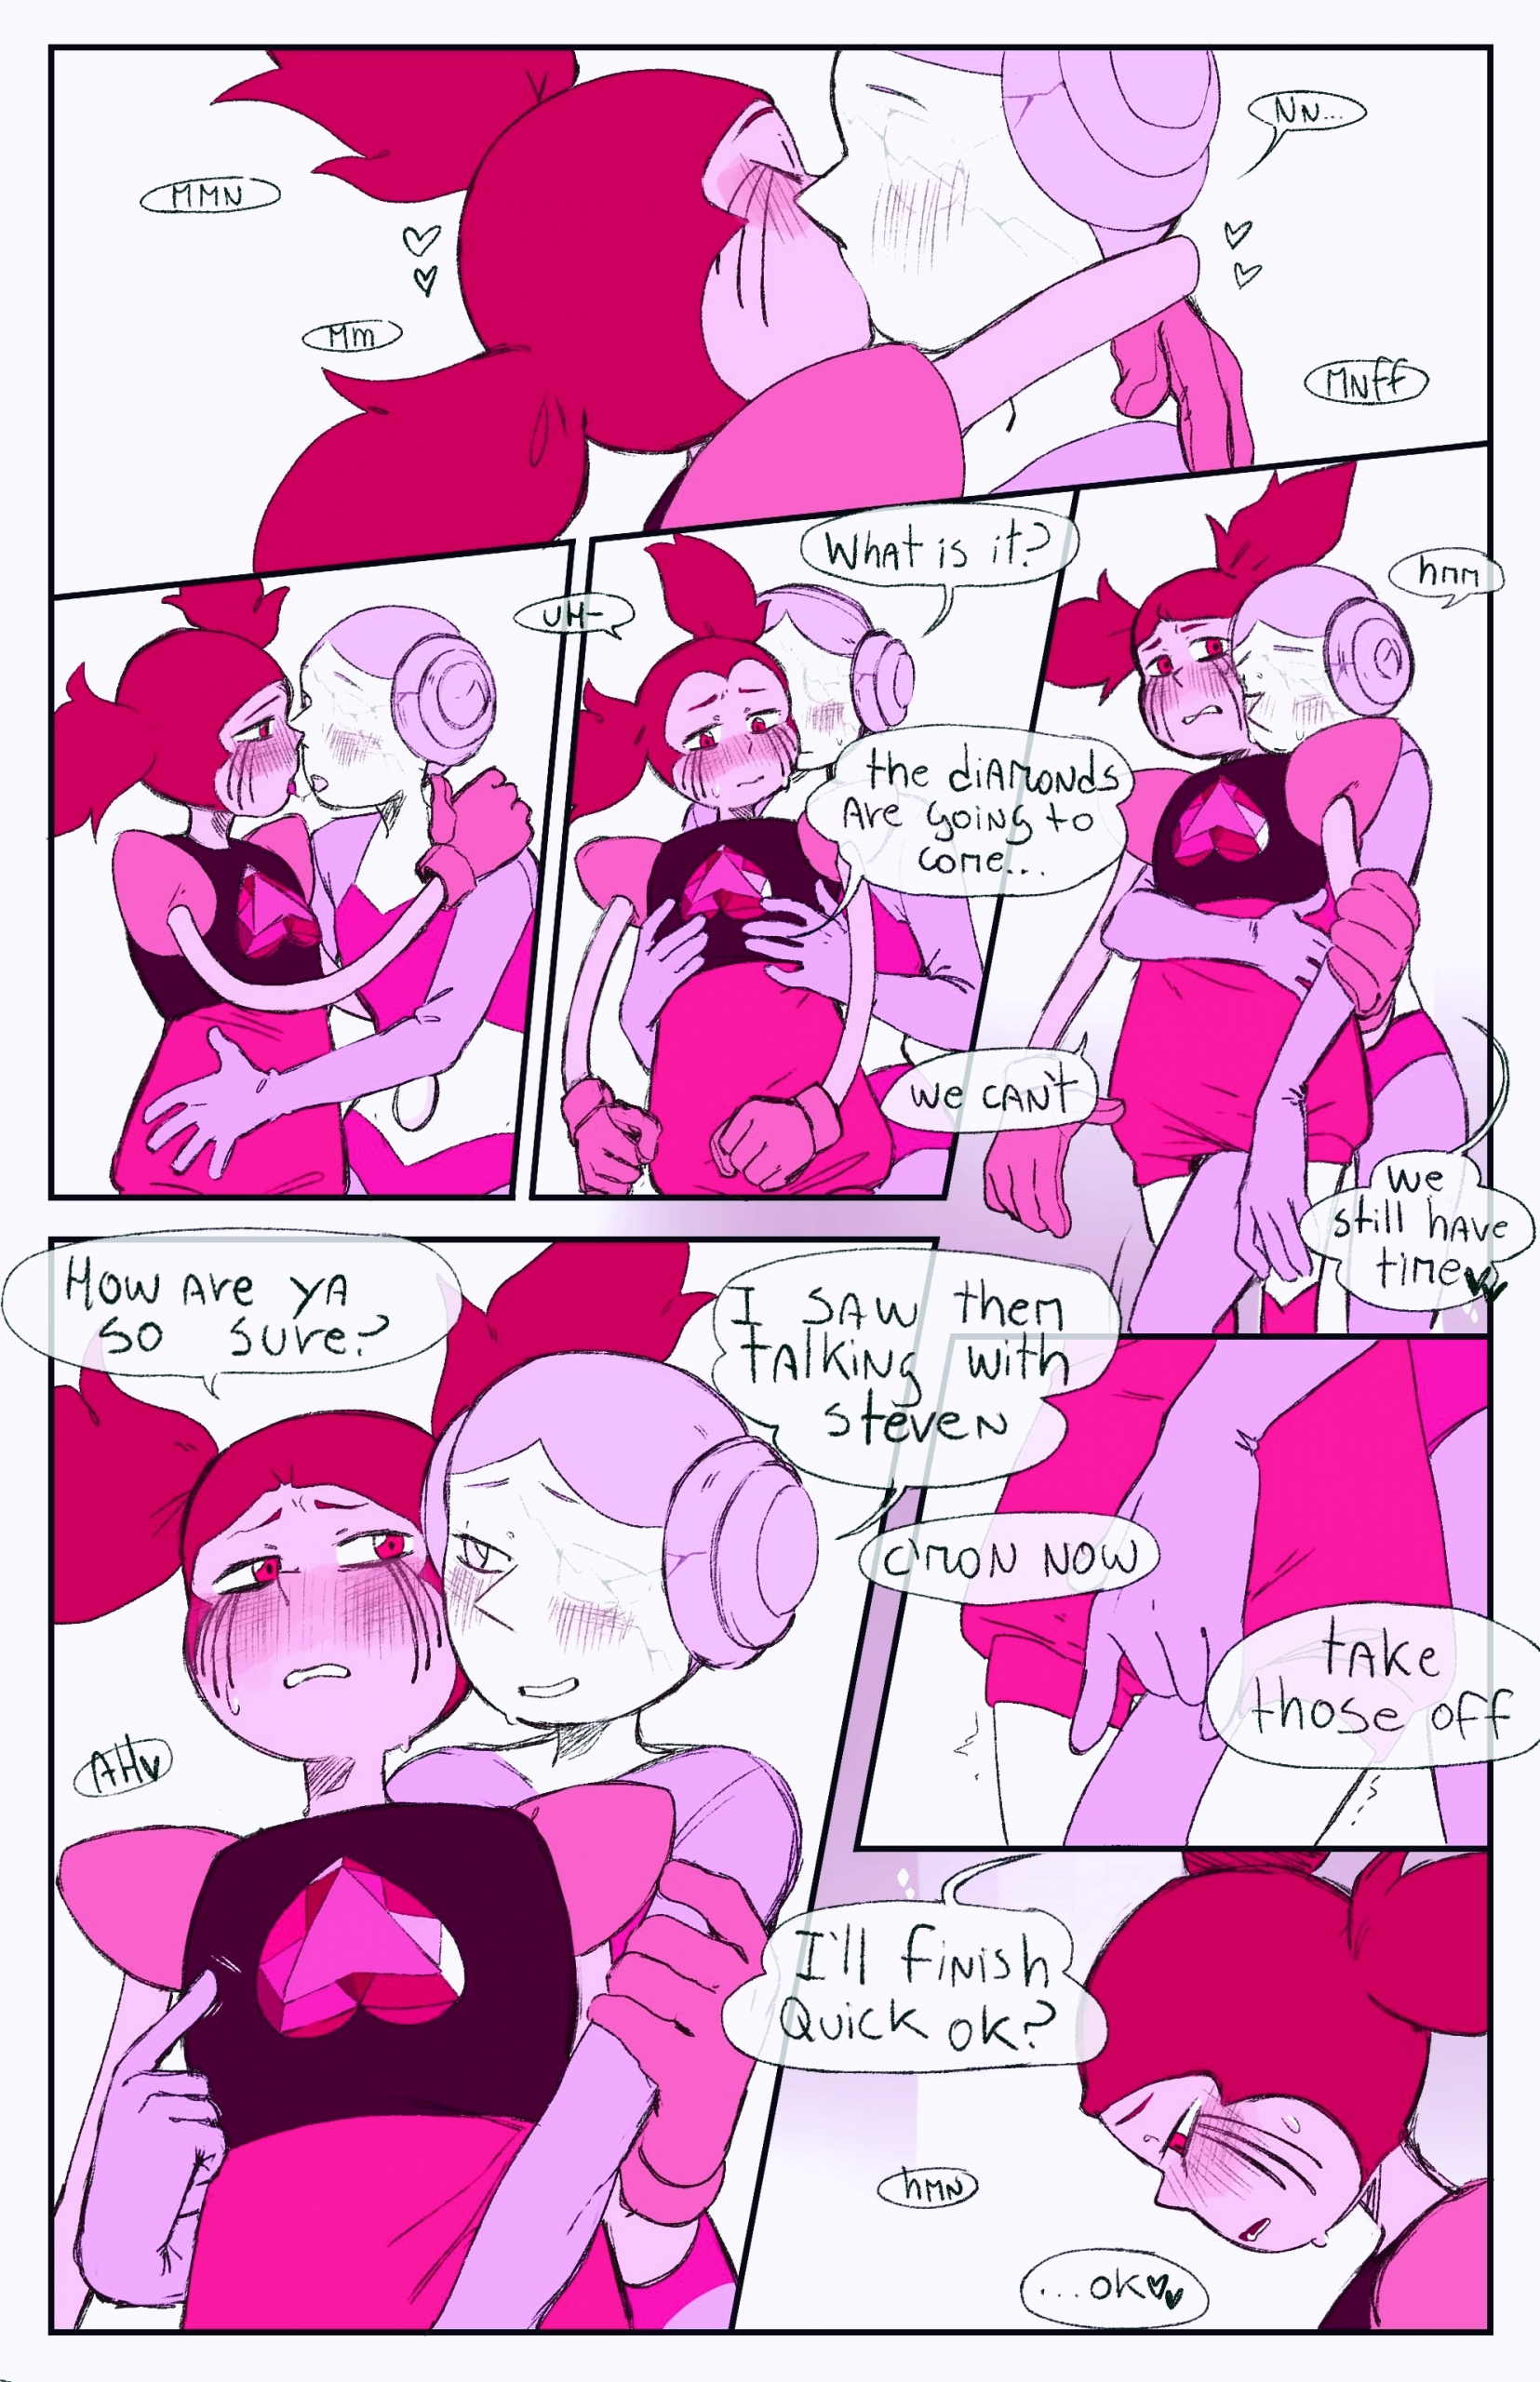 Spinearl porn comic page 01 on category Steven Universe